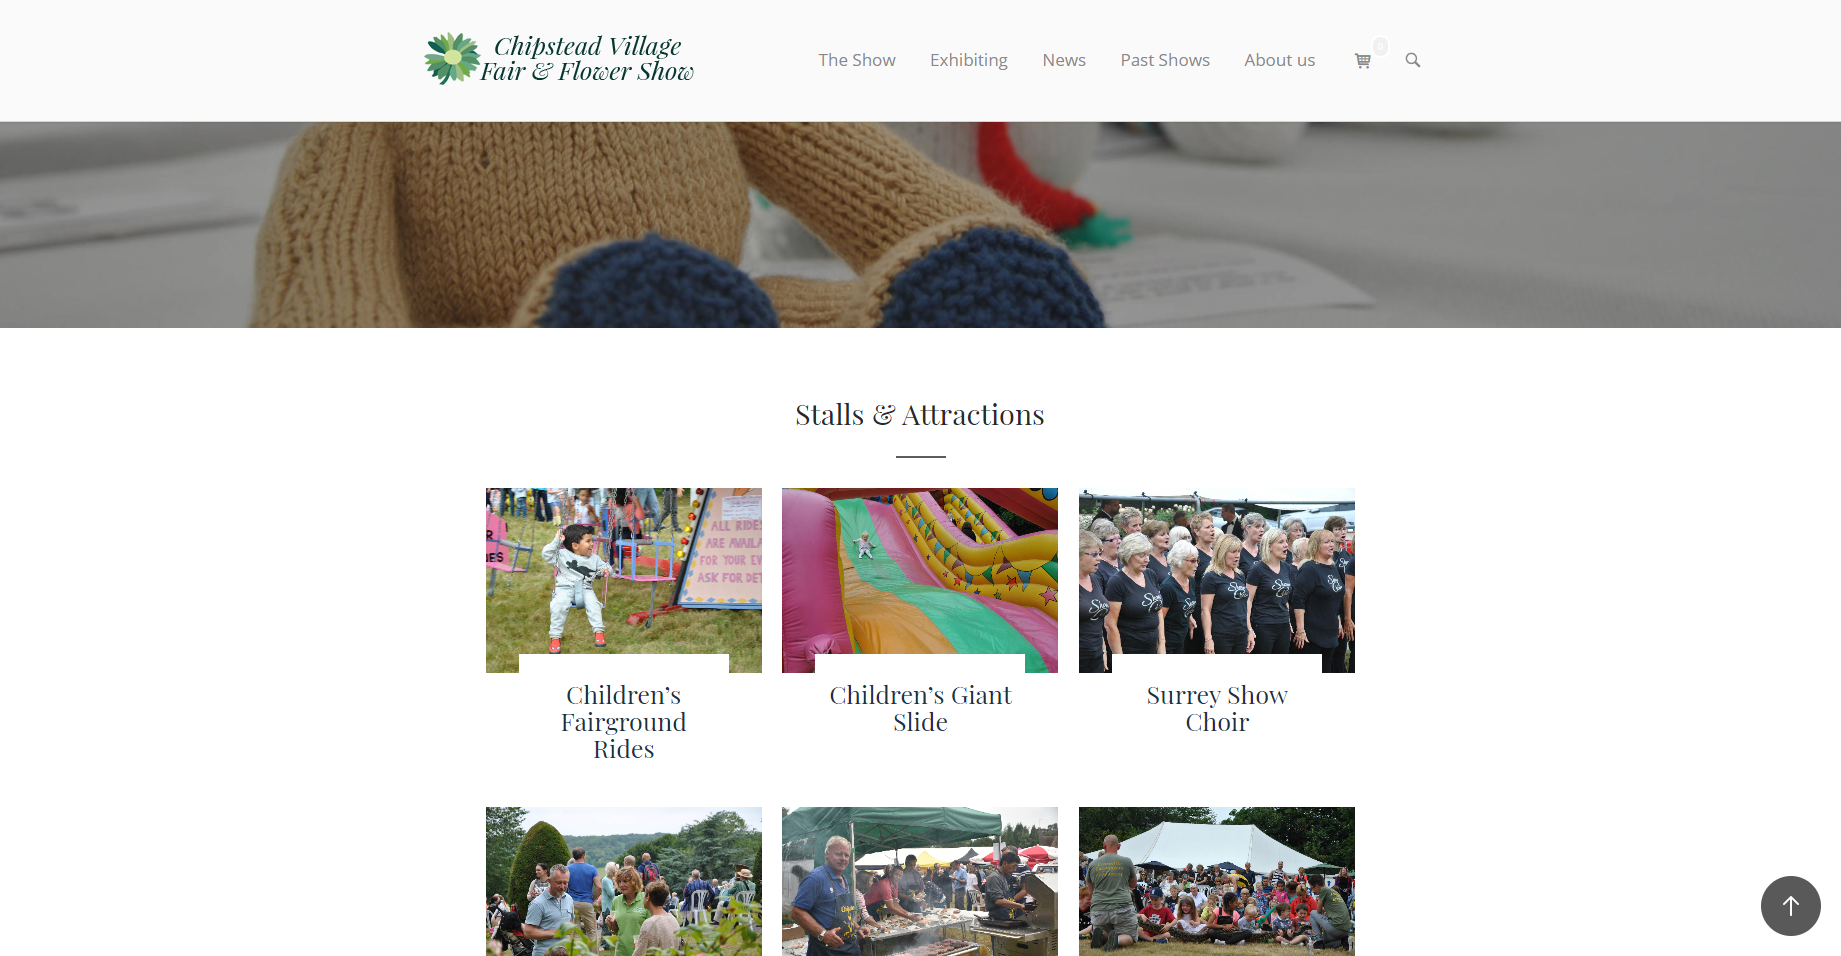 The Chipstead Village Fair & Flower Show website front page.